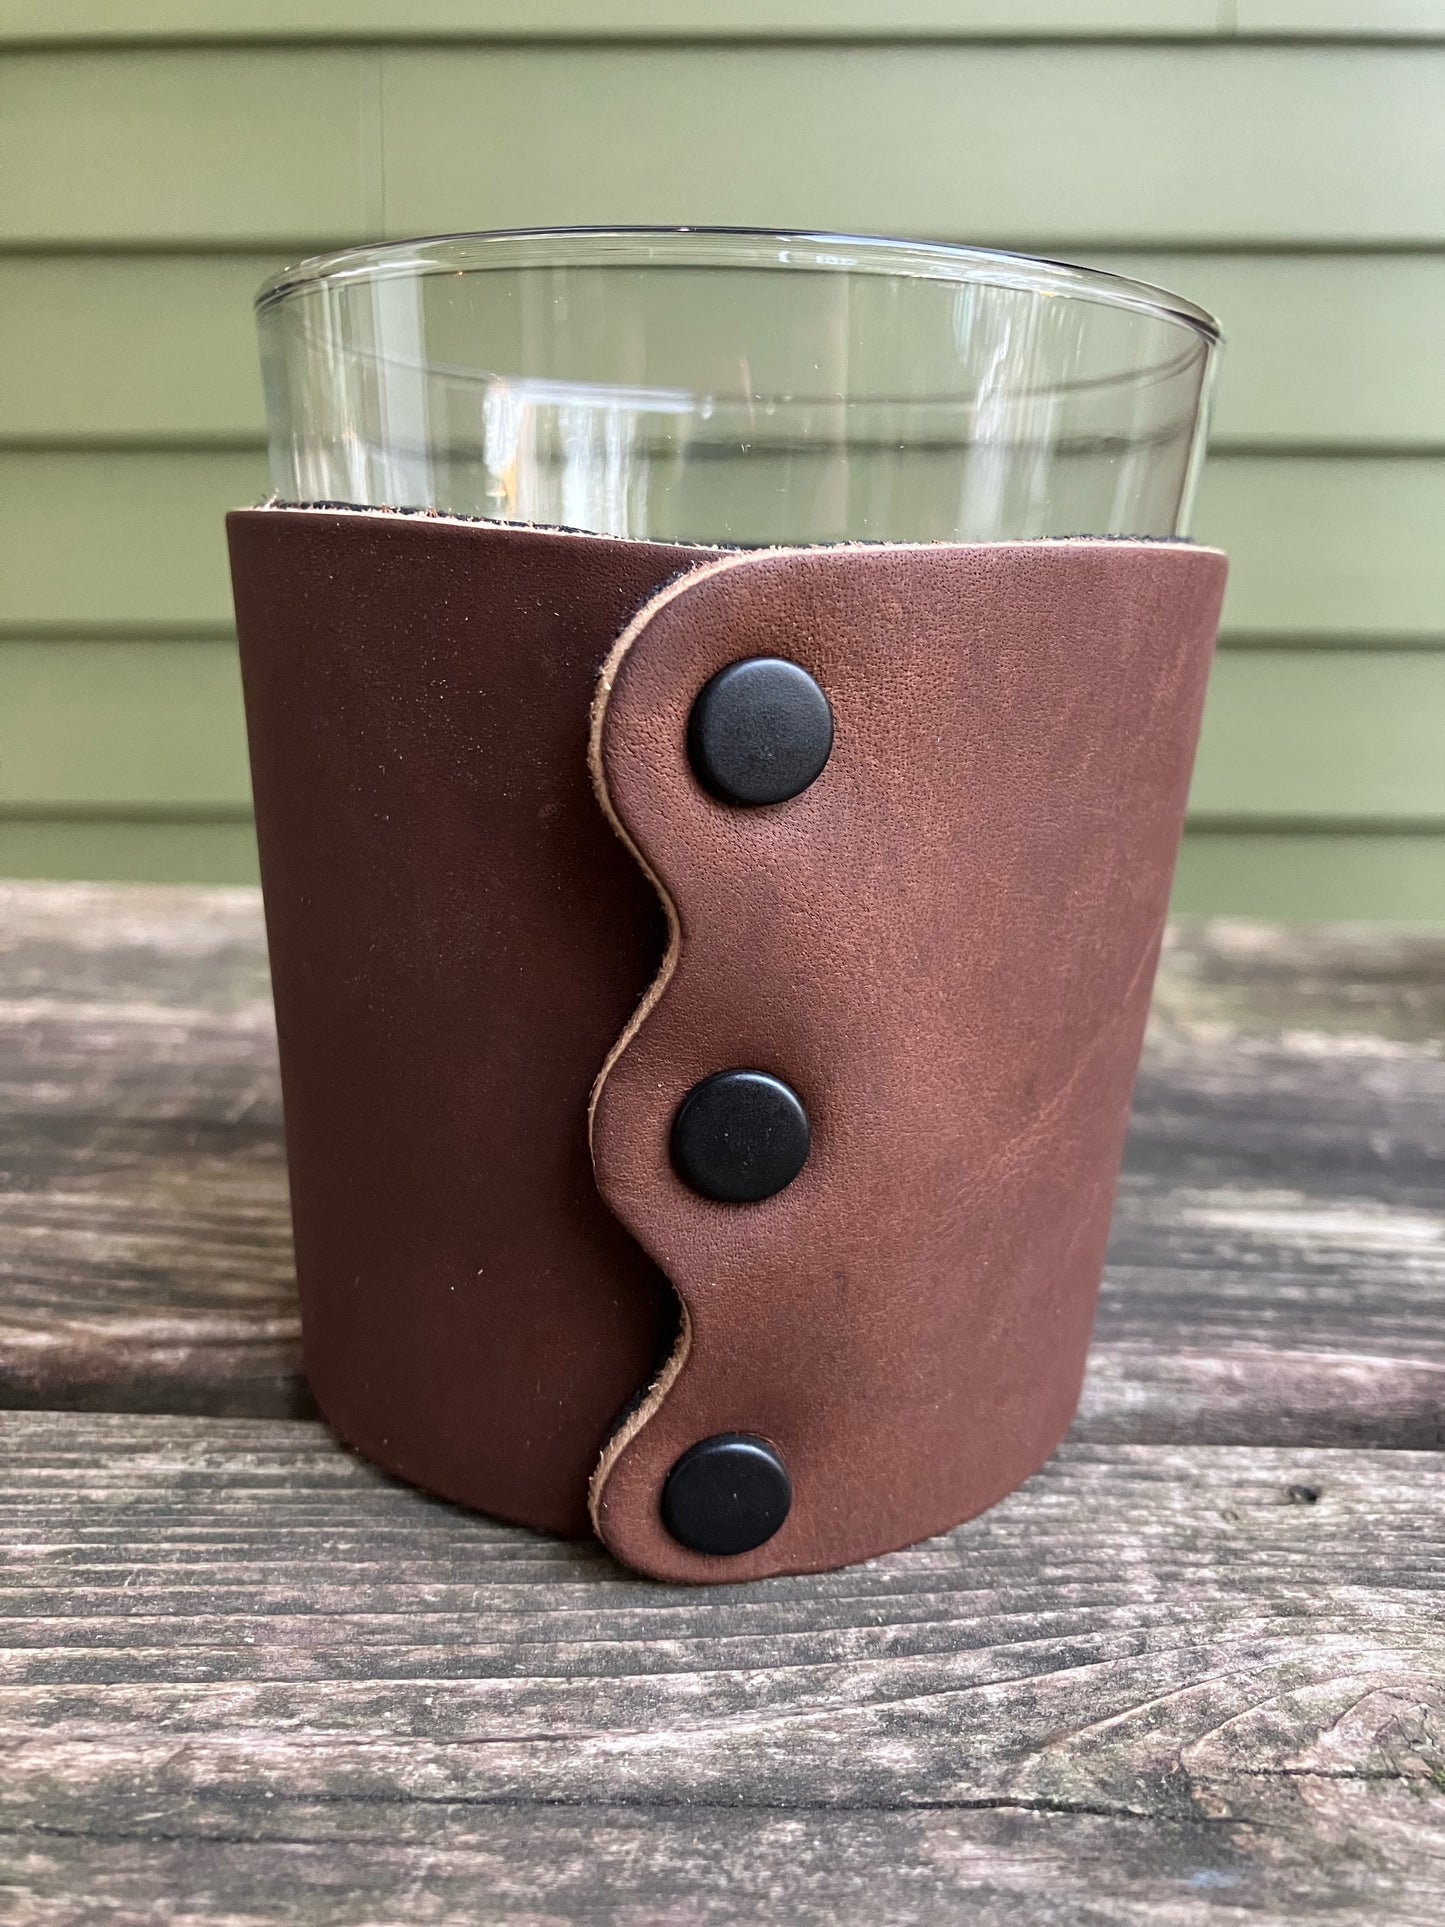 Leather Wrapped Whiskey Glass - Bourbon